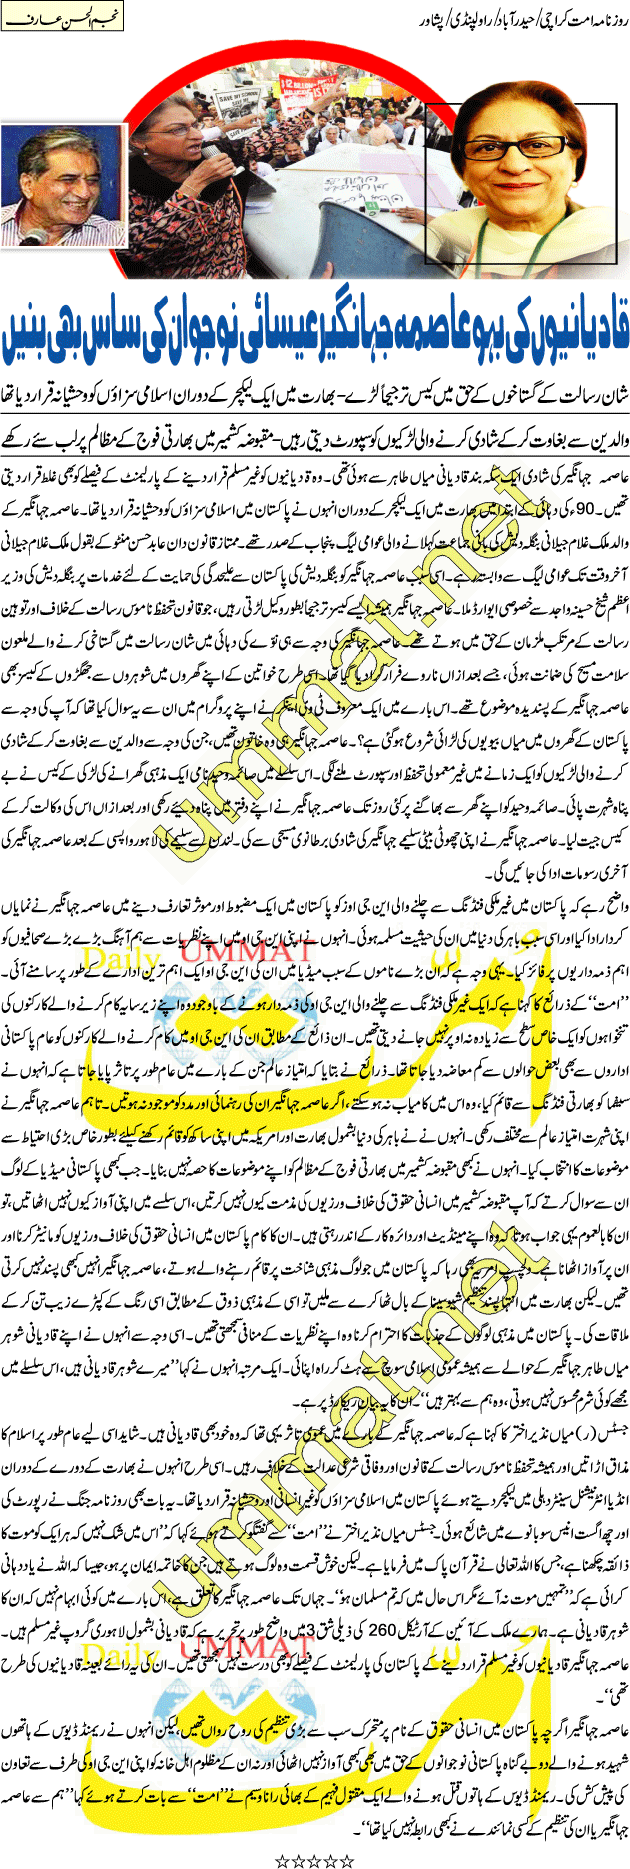 AJ-2_Asma Jahangir was Mirzai Daughter in Law & Christian Mother in Law_UMT_13-02-18.gif